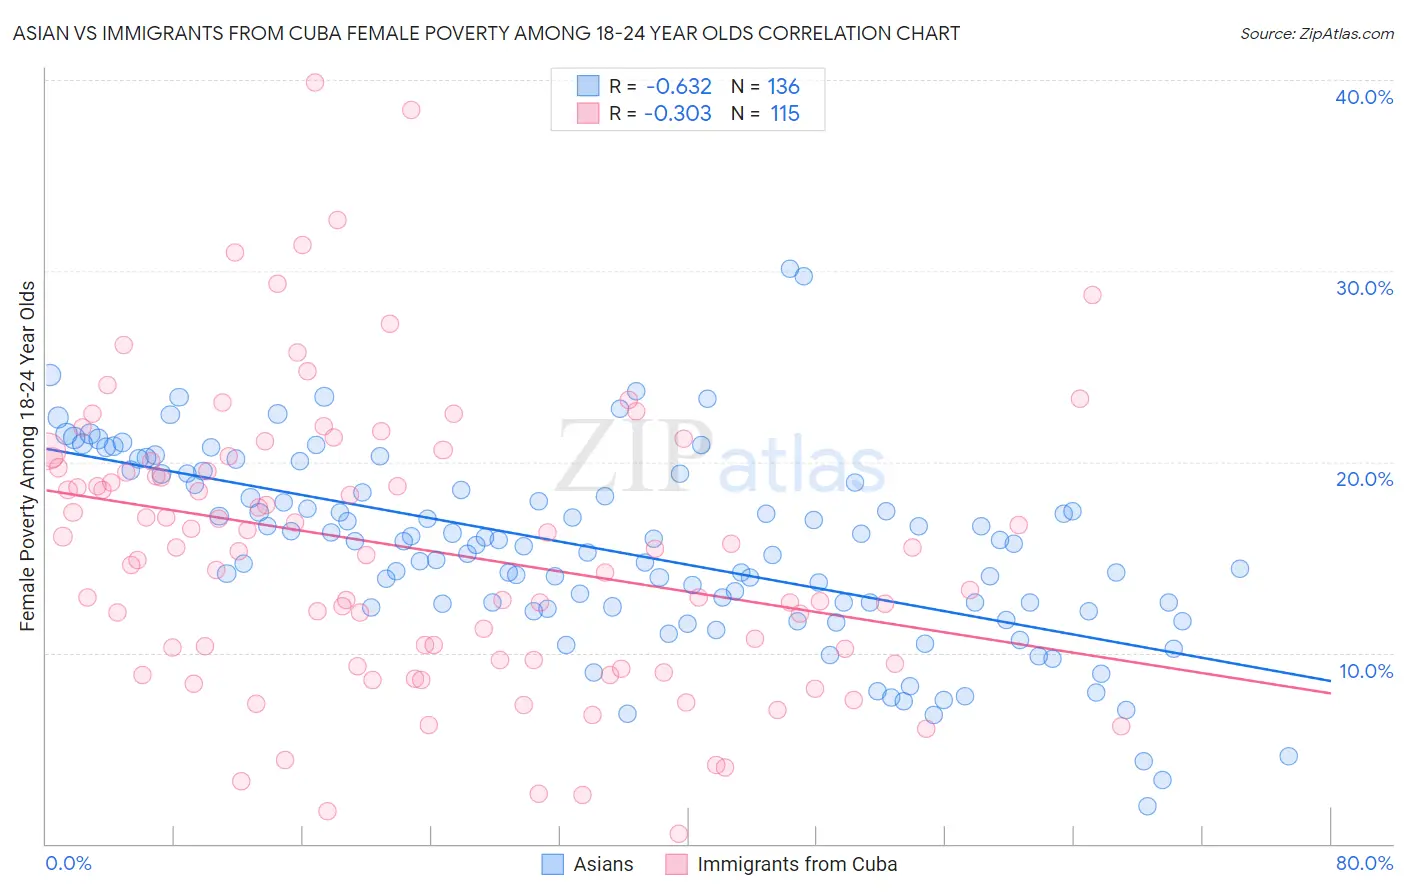 Asian vs Immigrants from Cuba Female Poverty Among 18-24 Year Olds